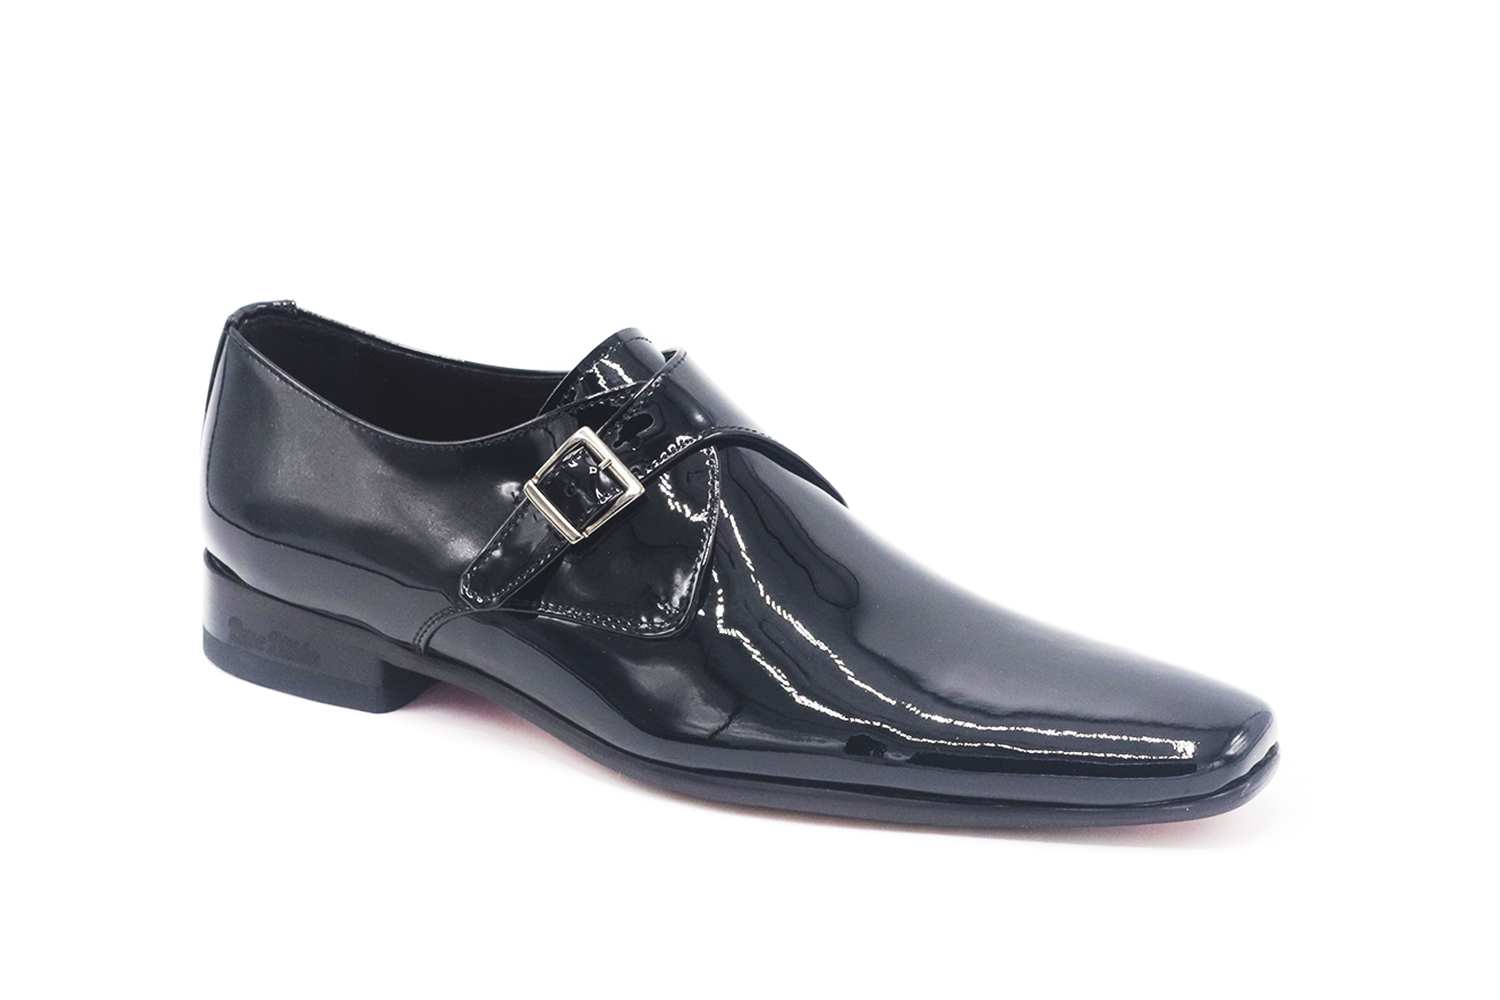 Patent leather shoe, designed in Travis patent leather,